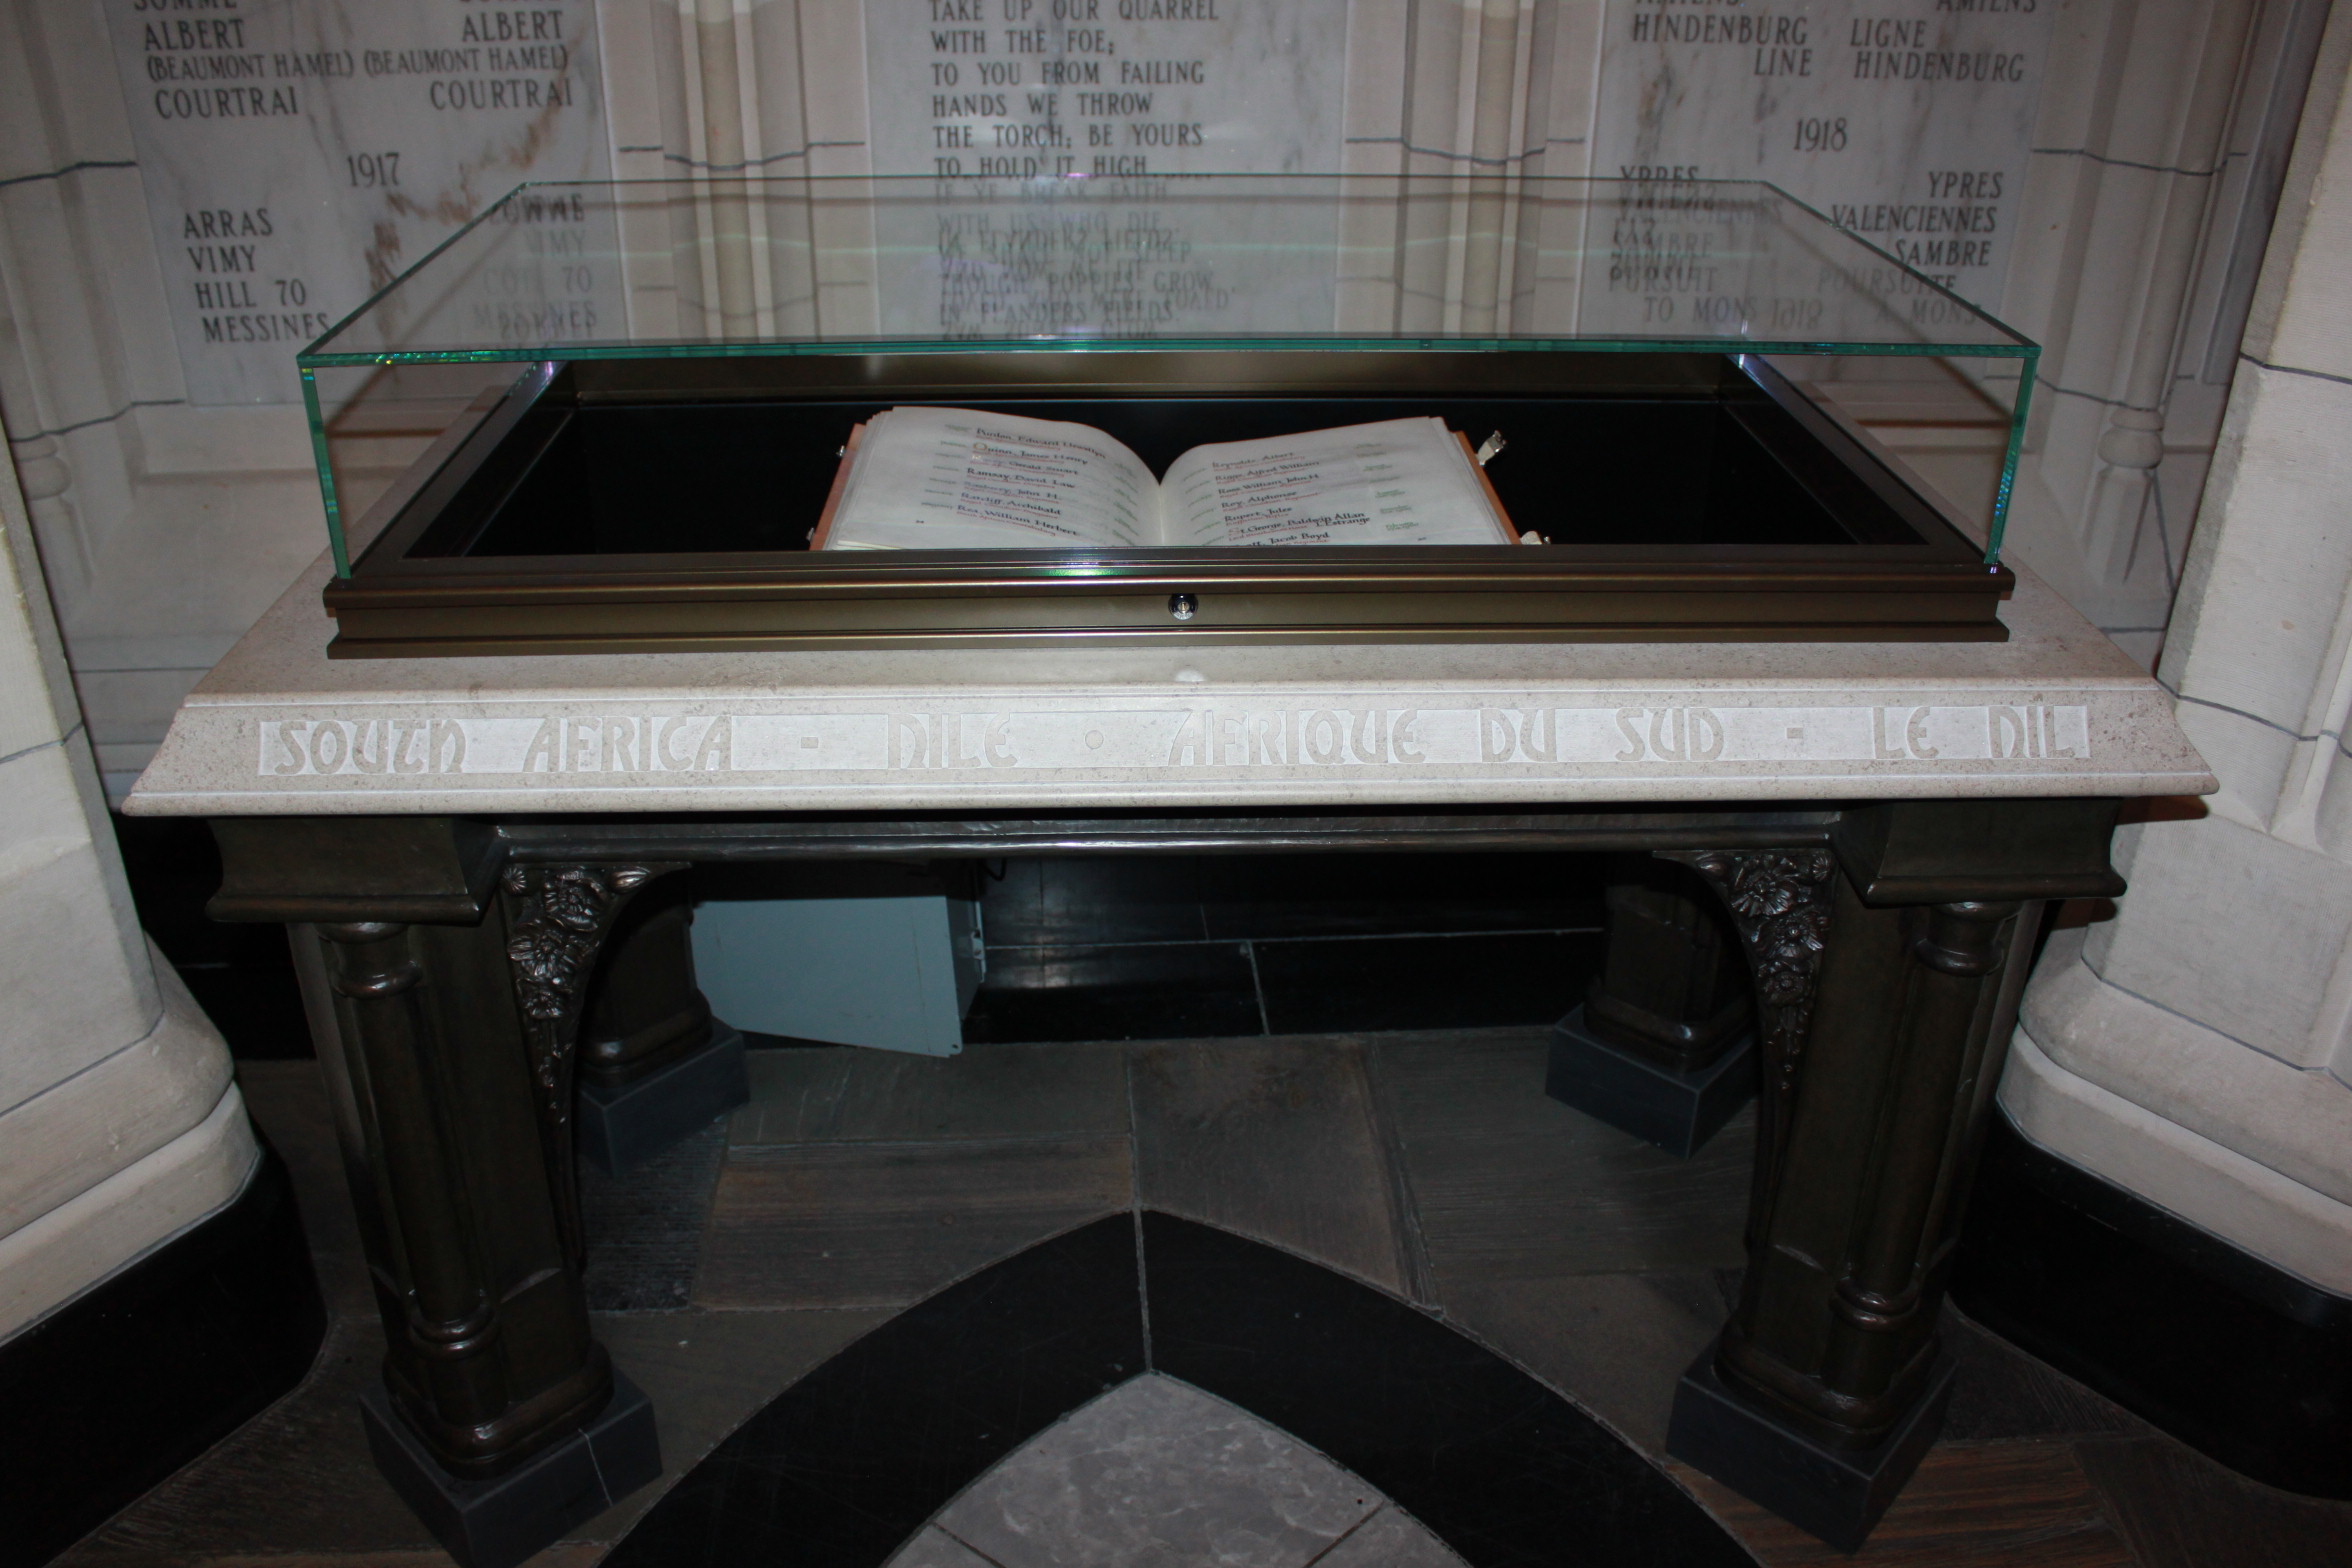 South African War Book of Remembrance